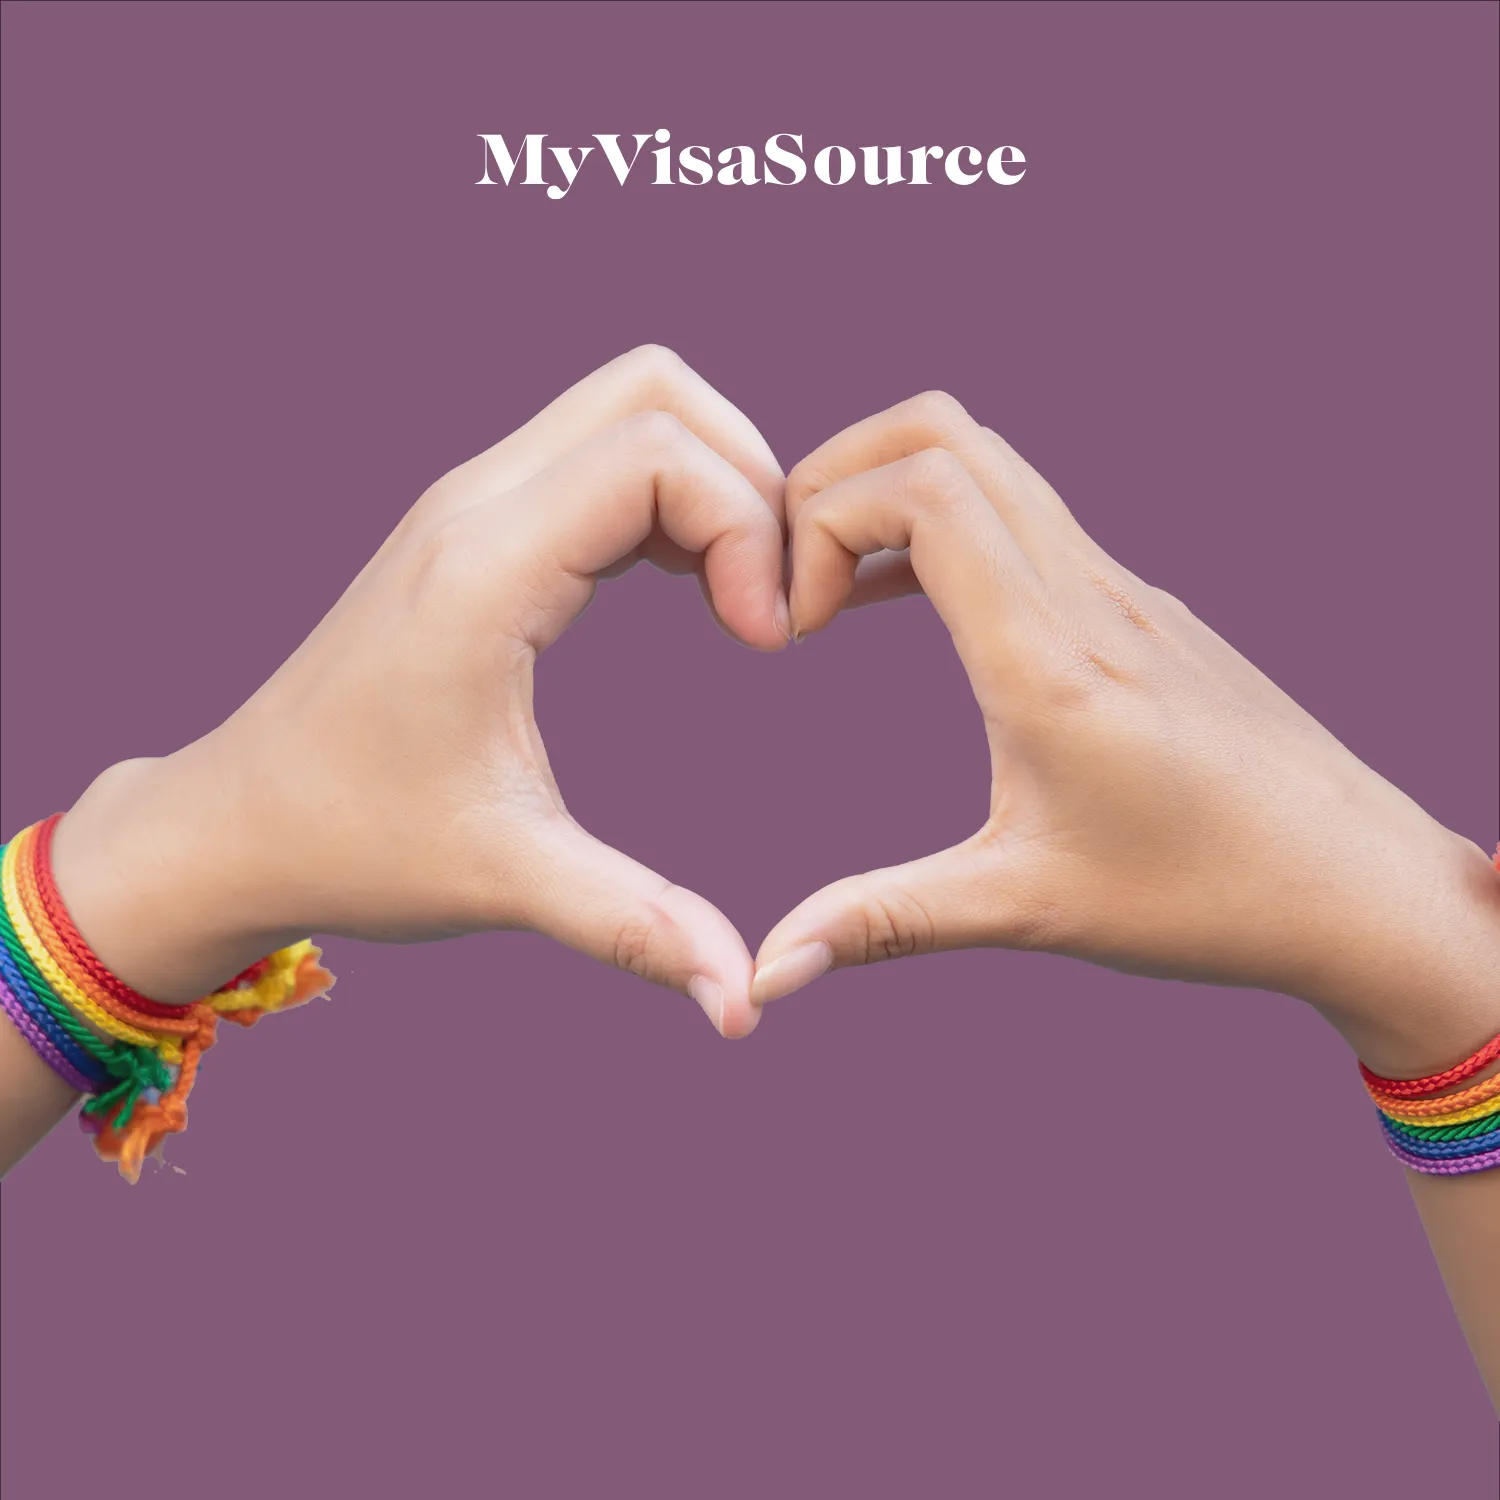 two sets of female hands forming heart shapes together on a purple background by my visa source